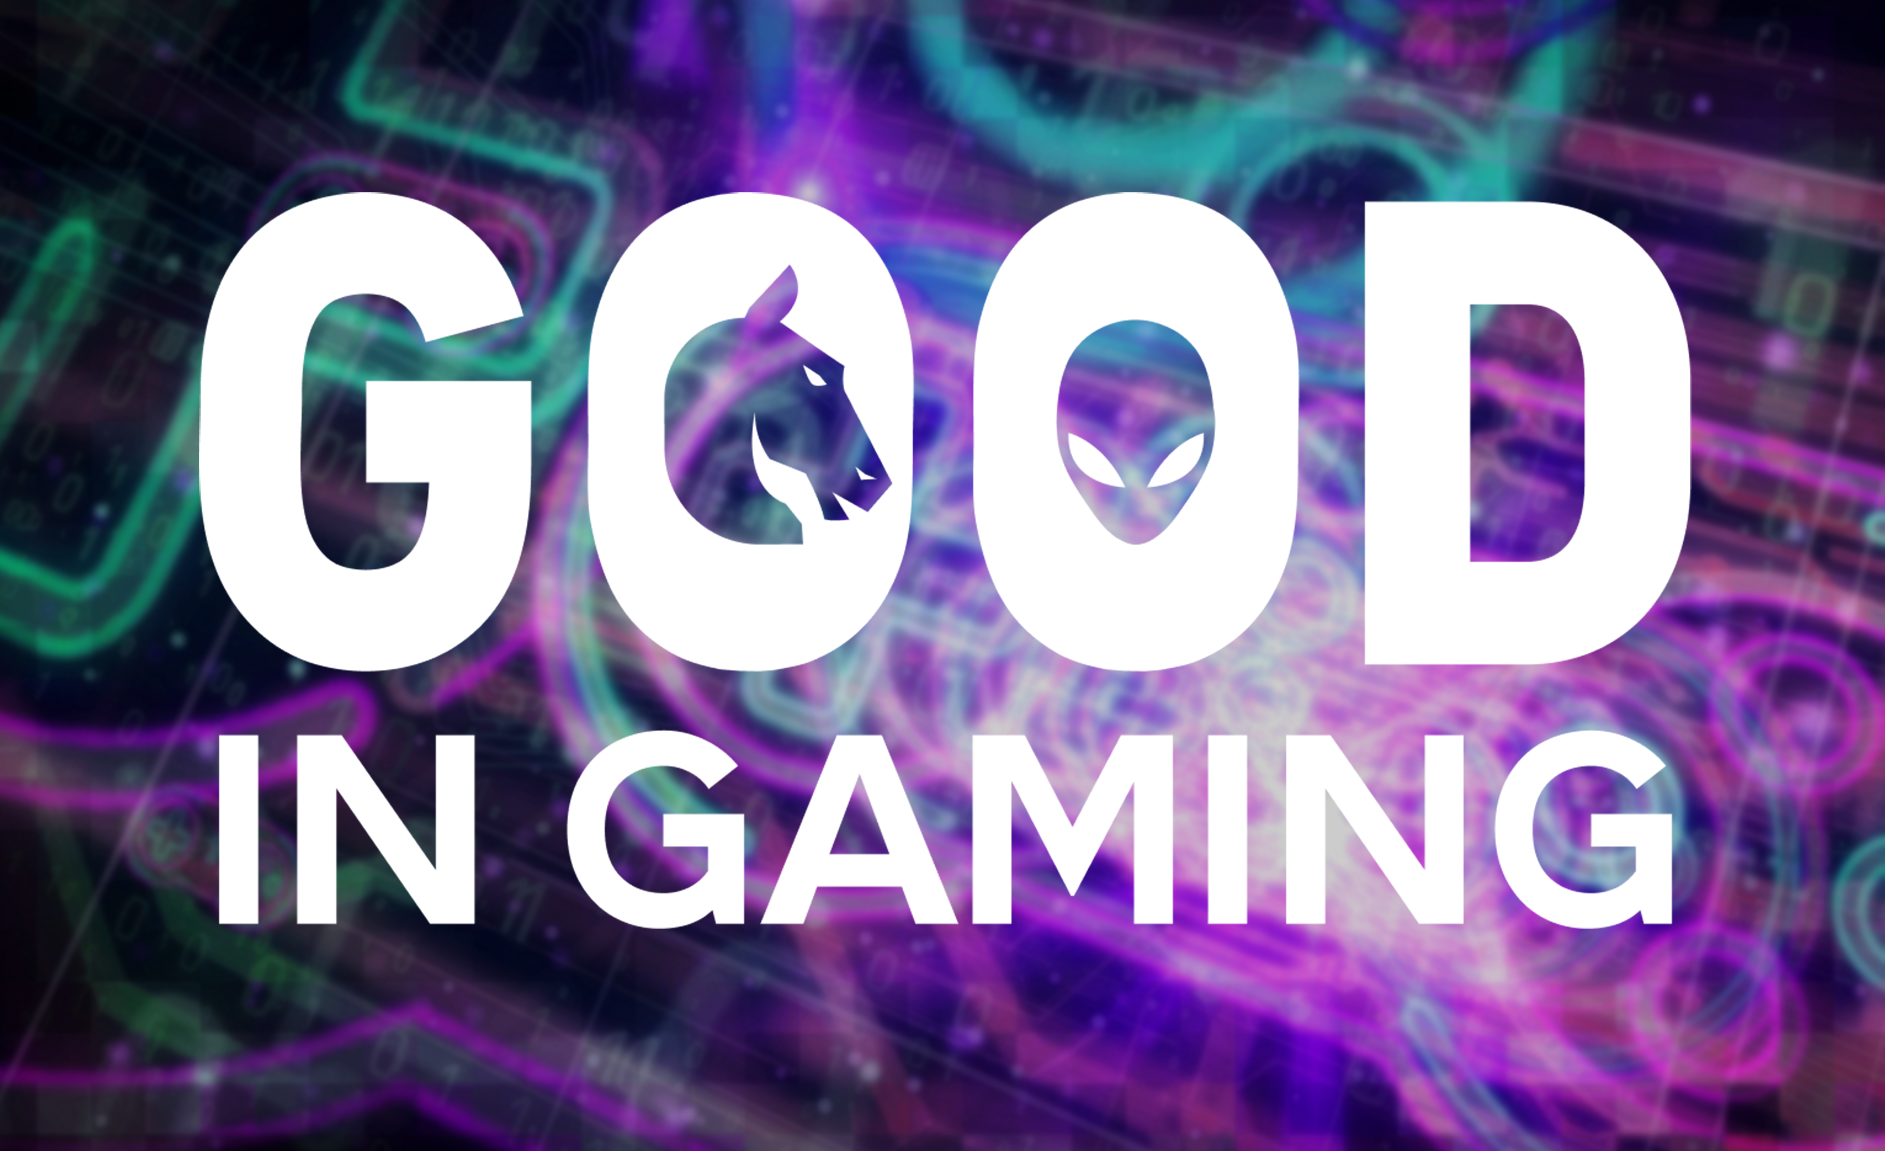 Team Liquid and Alienware launch Good in Gaming platform - Esports Insider thumbnail